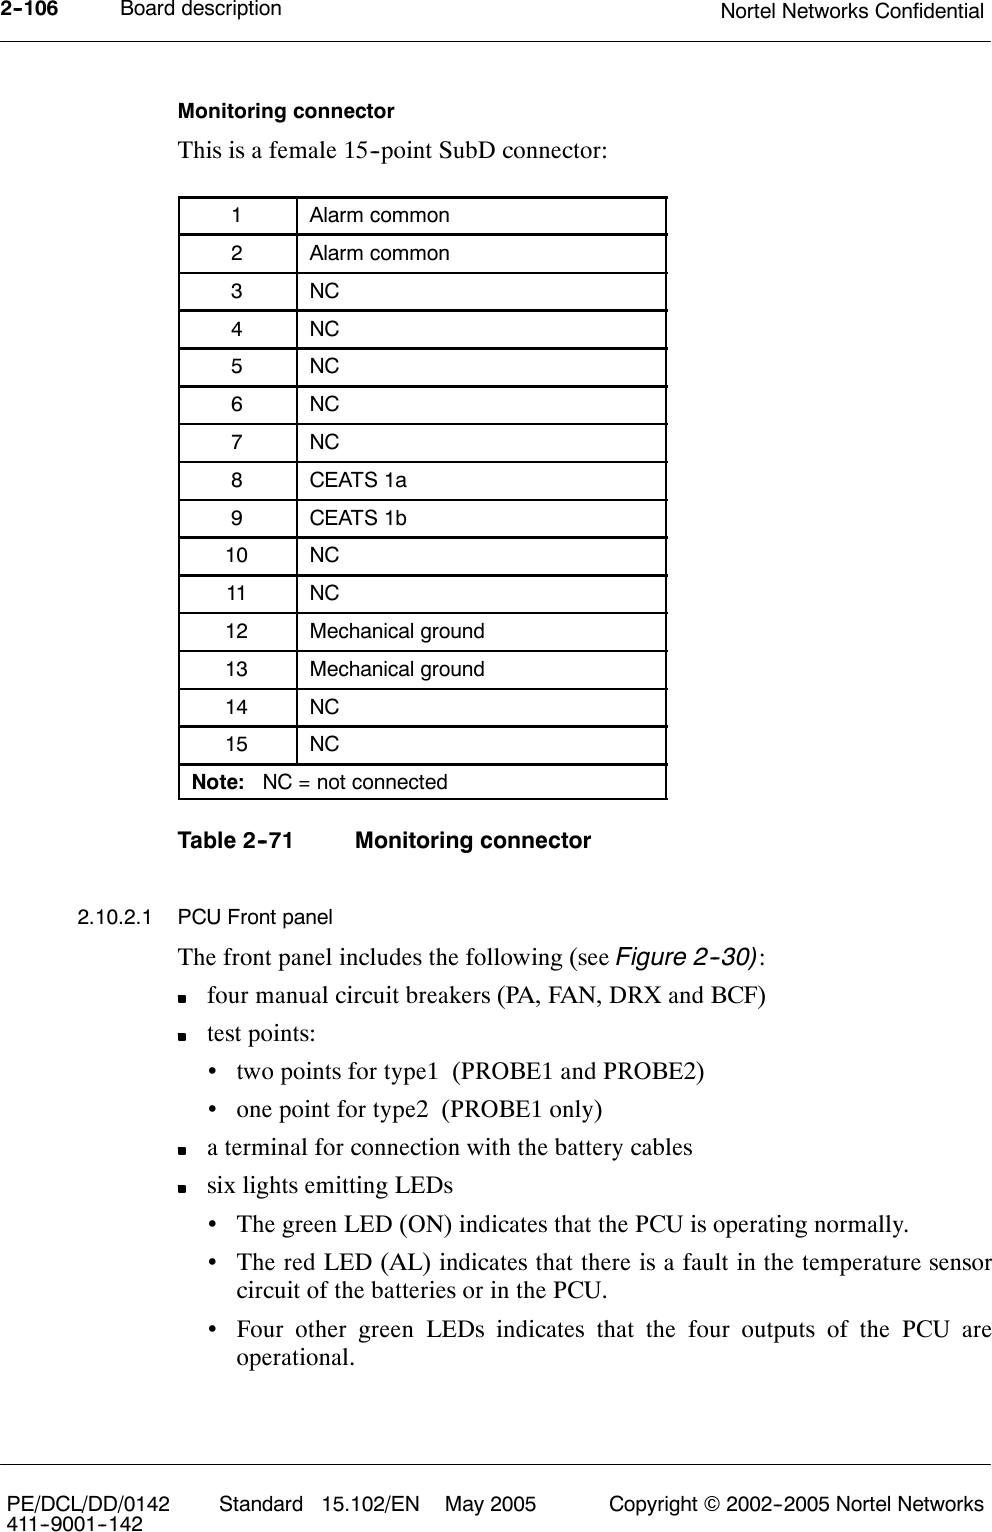 Board description Nortel Networks Confidential2--106PE/DCL/DD/0142411--9001--142 Standard 15.102/EN May 2005 Copyright ©2002--2005 Nortel NetworksMonitoring connectorThis is a female 15--point SubD connector:1Alarm common2Alarm common3NC4NC5NC6NC7NC8CEATS 1a9CEATS 1b10 NC11 NC12 Mechanical ground13 Mechanical ground14 NC15 NCNote: NC = not connectedTable 2--71 Monitoring connector2.10.2.1 PCU Front panelThe front panel includes the following (see Figure 2--30):four manual circuit breakers (PA, FAN, DRX and BCF)test points:•two points for type1 (PROBE1 and PROBE2)•one point for type2 (PROBE1 only)a terminal for connection with the battery cablessix lights emitting LEDs•The green LED (ON) indicates that the PCU is operating normally.•The red LED (AL) indicates that there is a fault in the temperature sensorcircuit of the batteries or in the PCU.•Four other green LEDs indicates that the four outputs of the PCU areoperational.